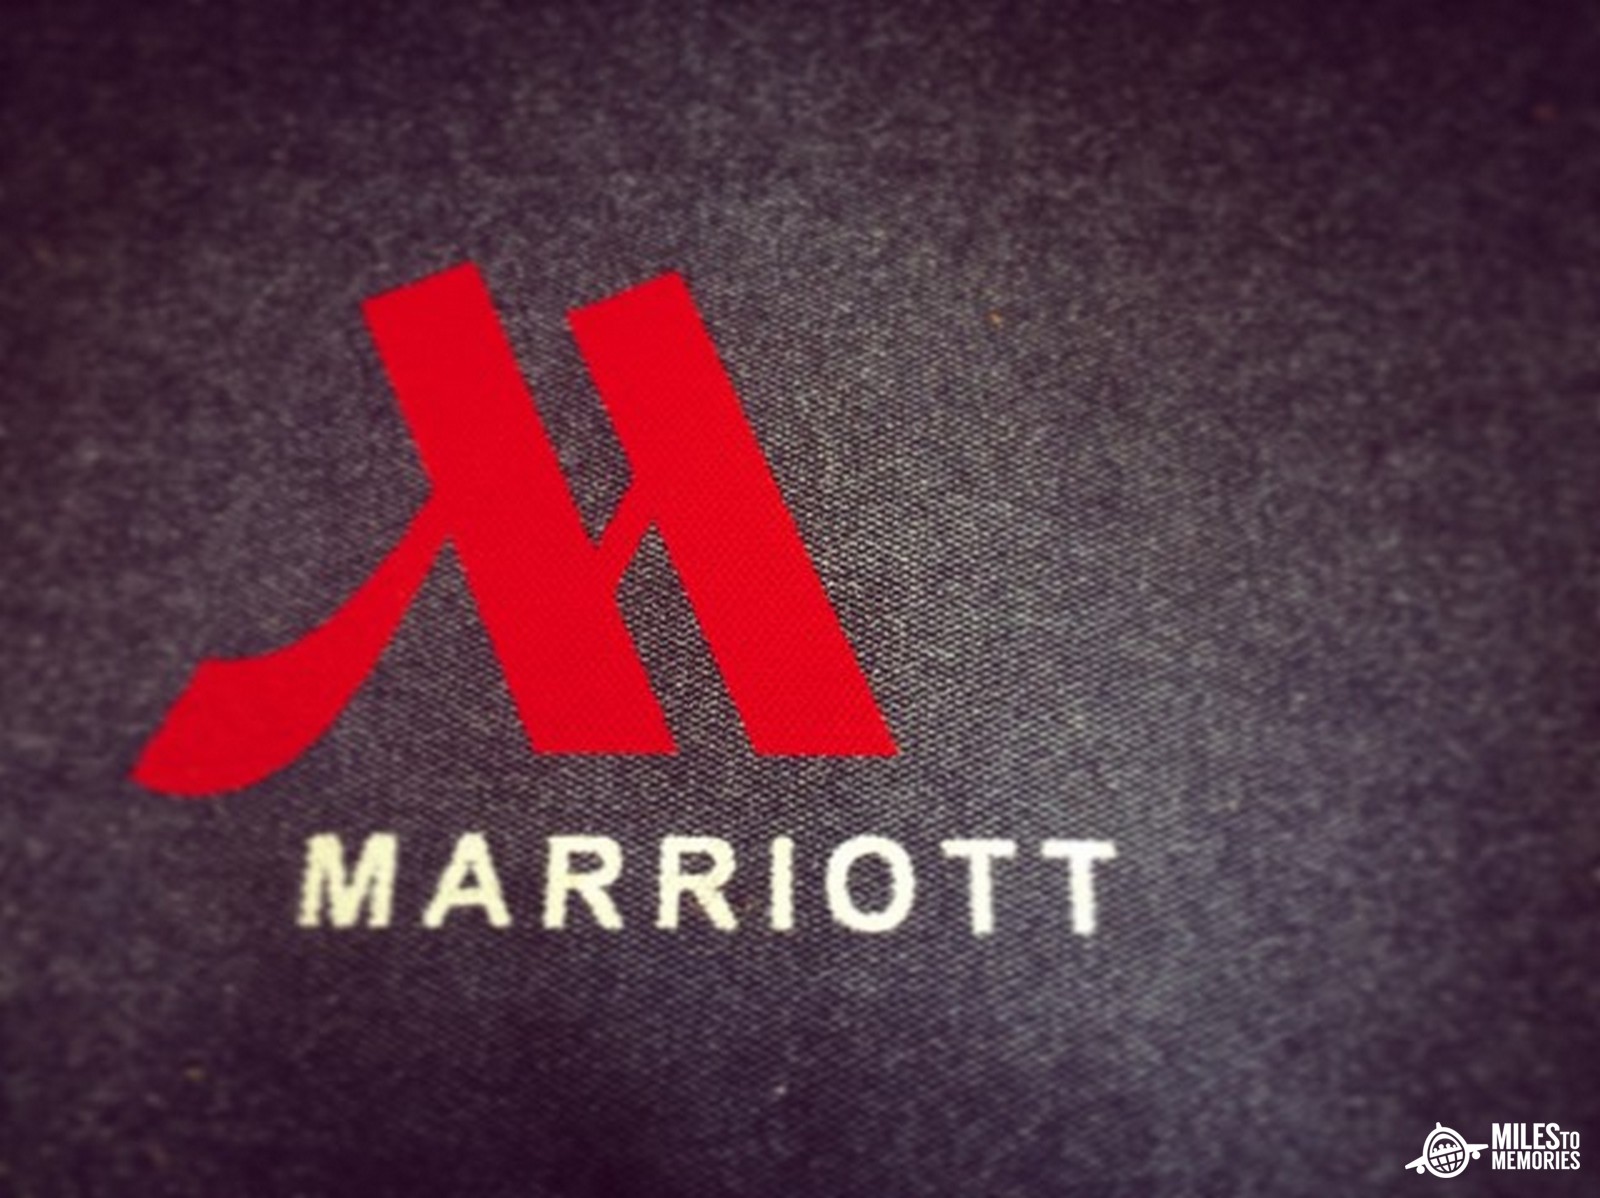 How To Know If You're Eligible For A Marriott Credit Card Welcome Offer